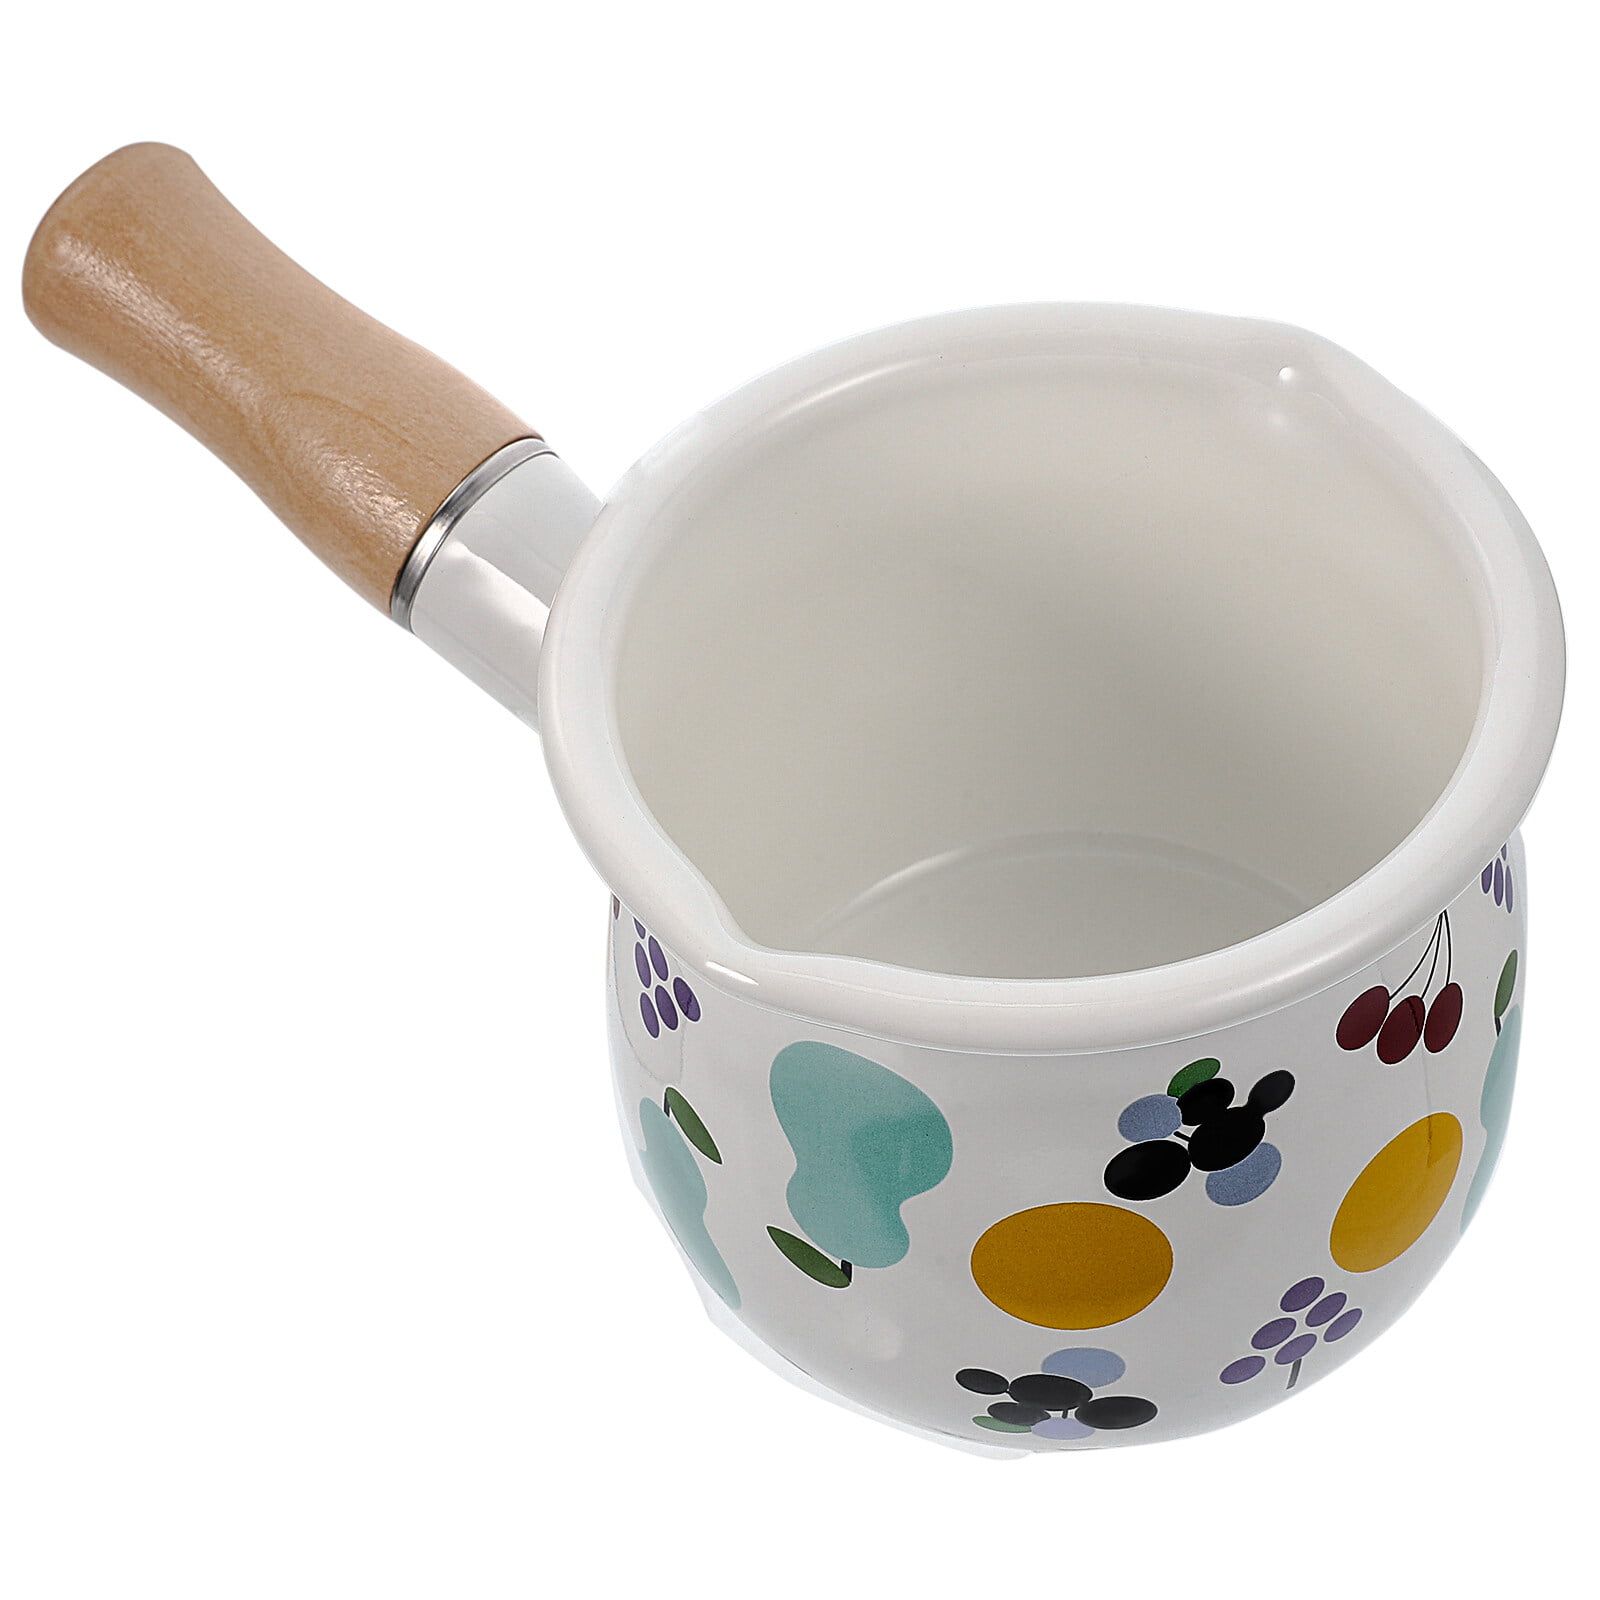 YumCute Home Enamel Milk Pan, Mini Butter Warmer 4 Inch 17 Oz Milk Pot  Enamel Sauce Pan Milk Warmer Pot Small Cookware with Wooden Handle, Perfect